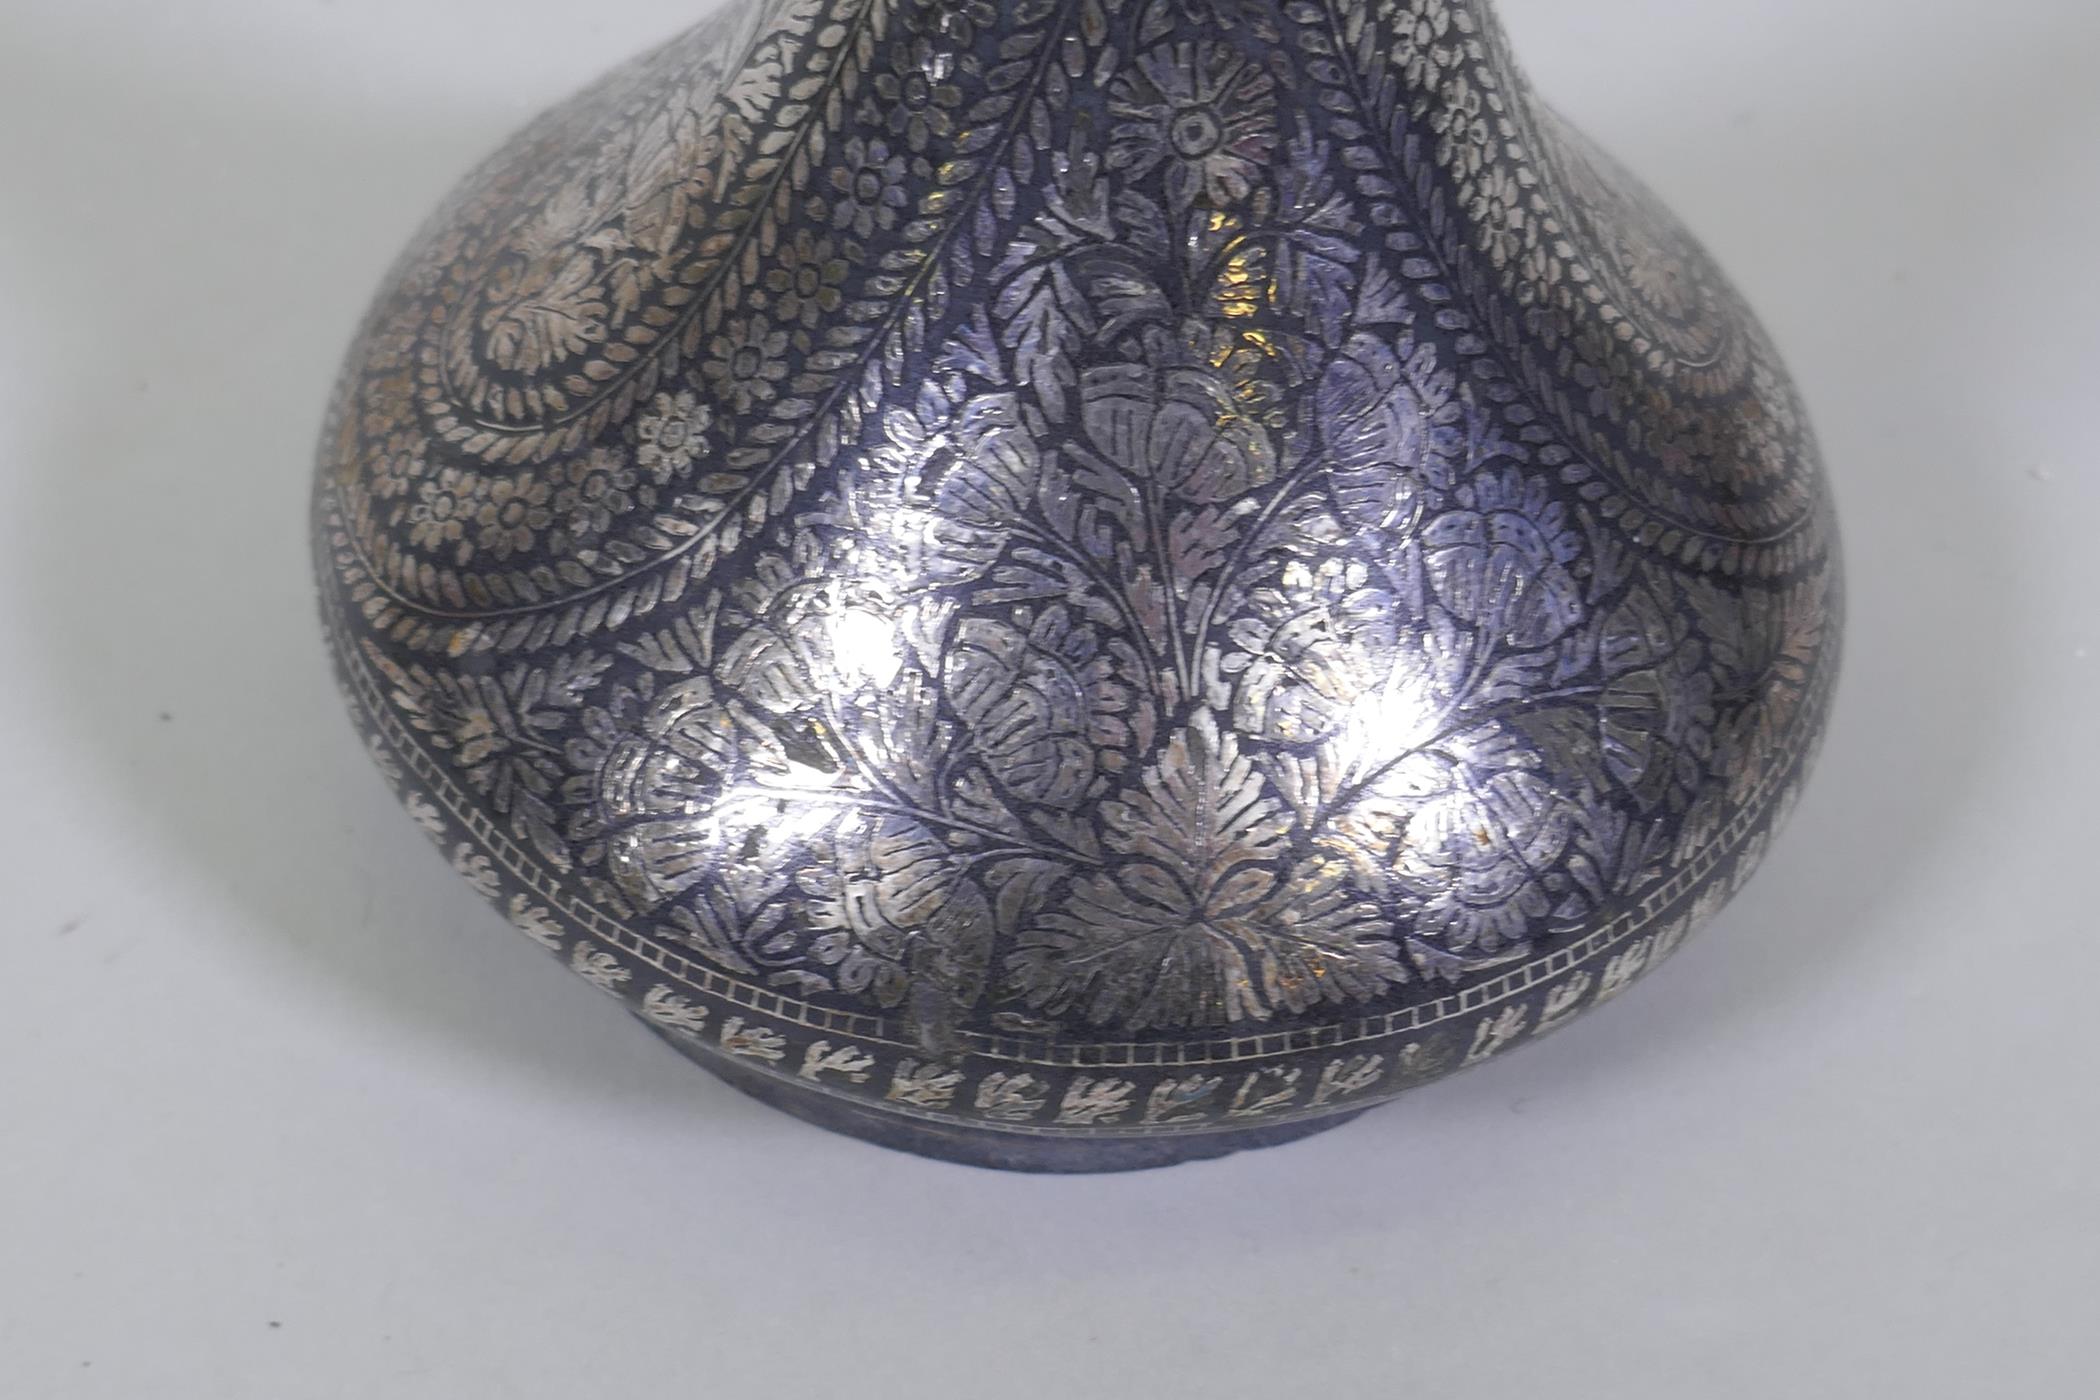 A Bidri vase/hookah base inlaid with silver decoration, 23cm high - Image 2 of 4